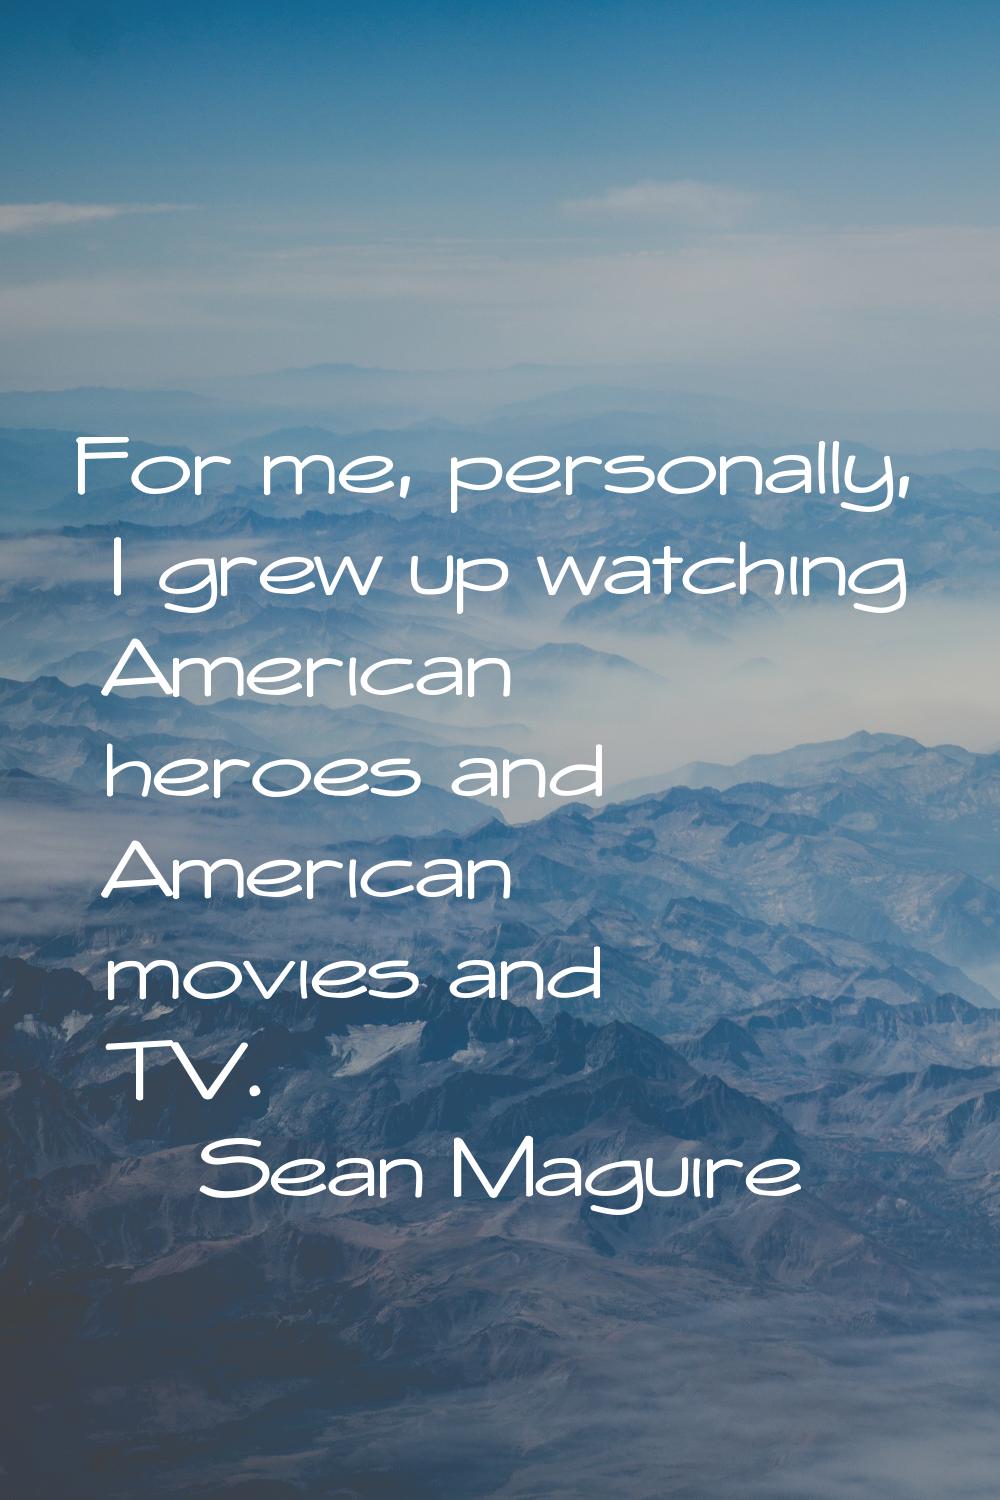 For me, personally, I grew up watching American heroes and American movies and TV.